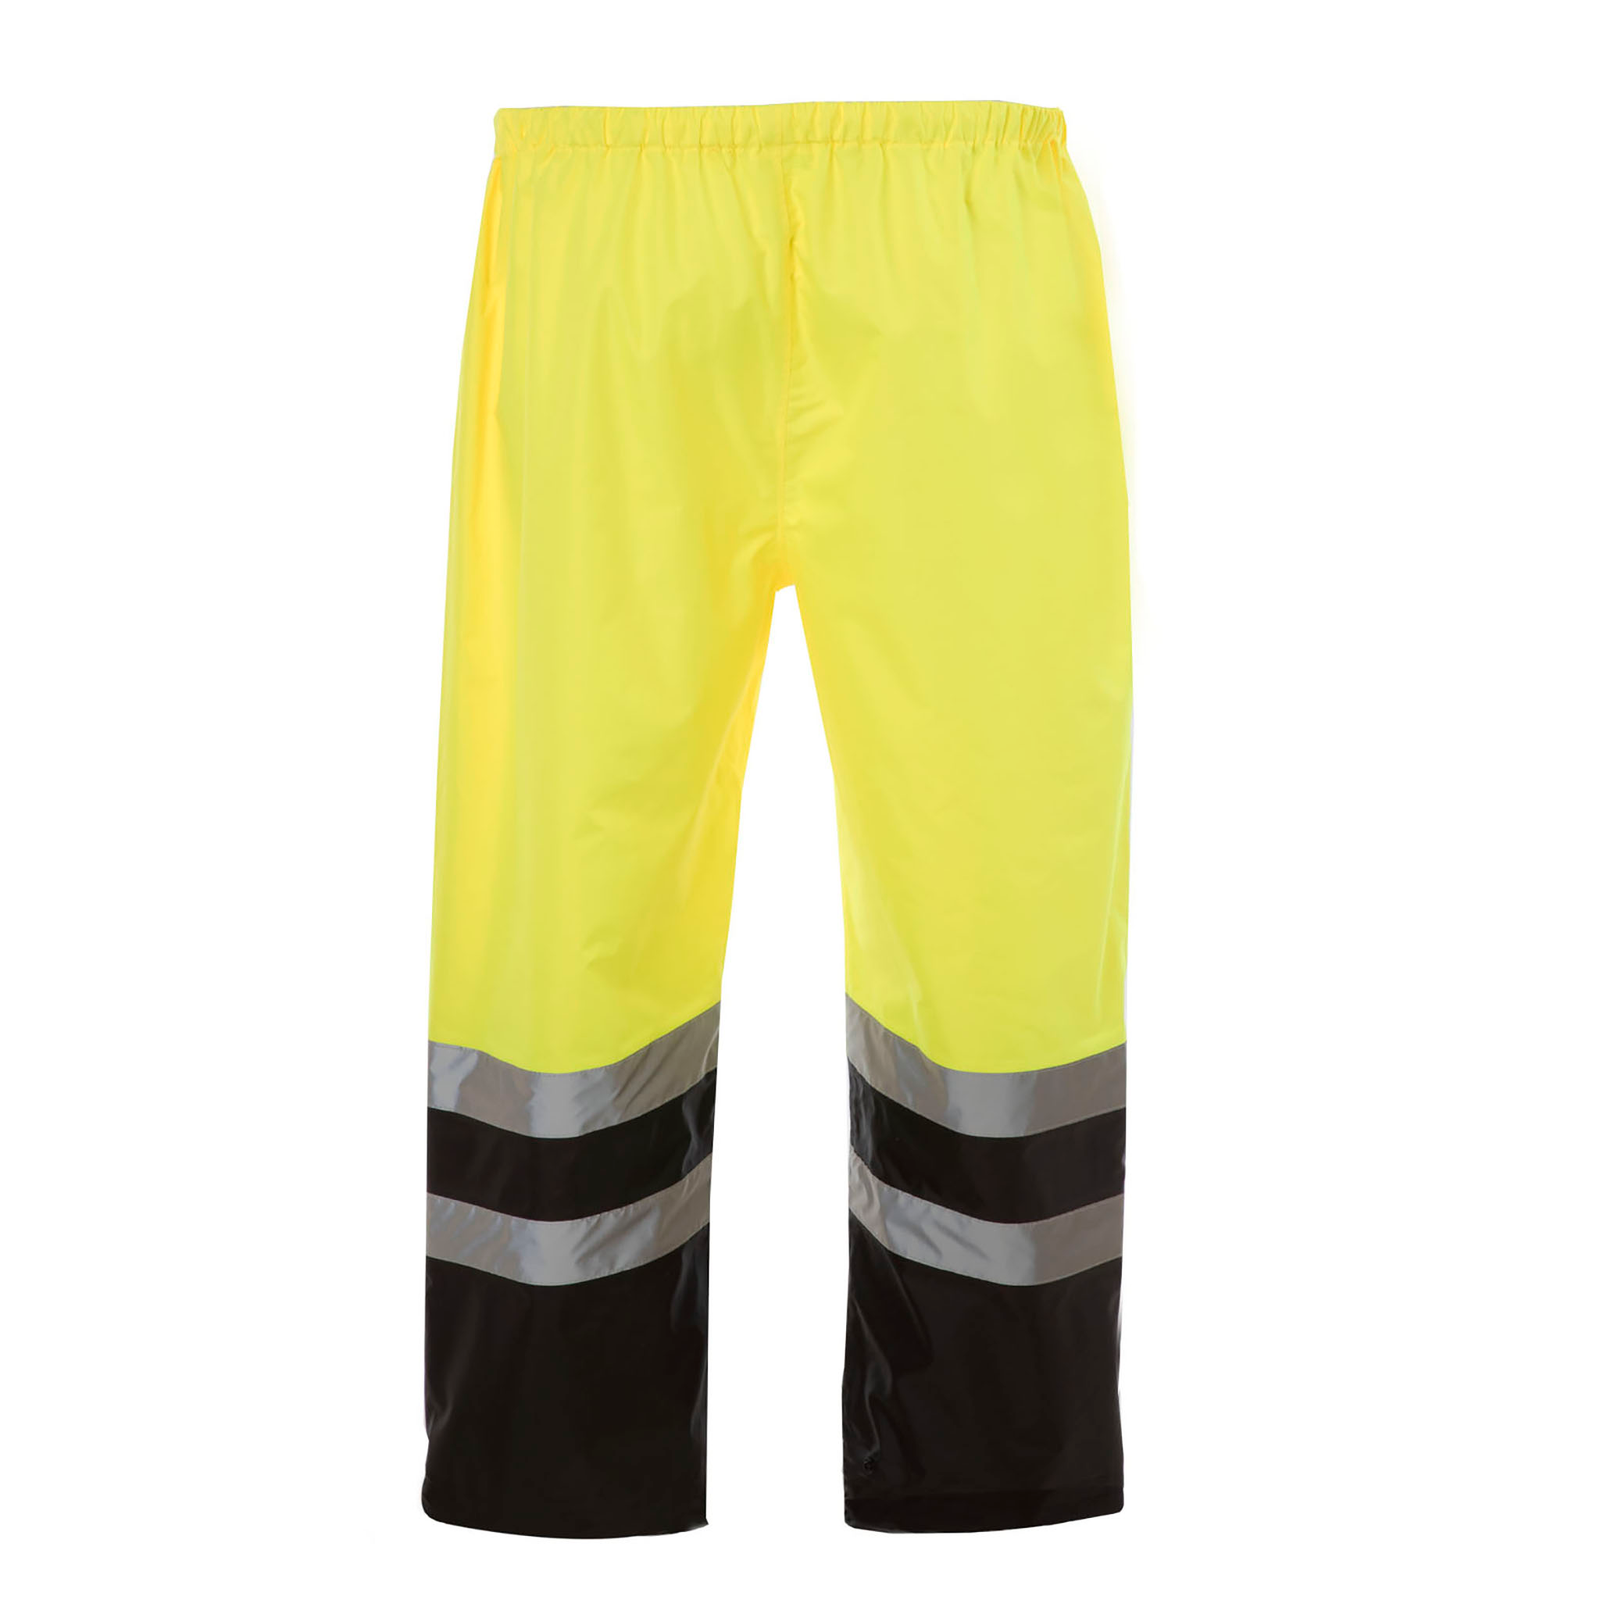 Front view of the black and yellow high visibility JORESTECH rain pant with reflective strips